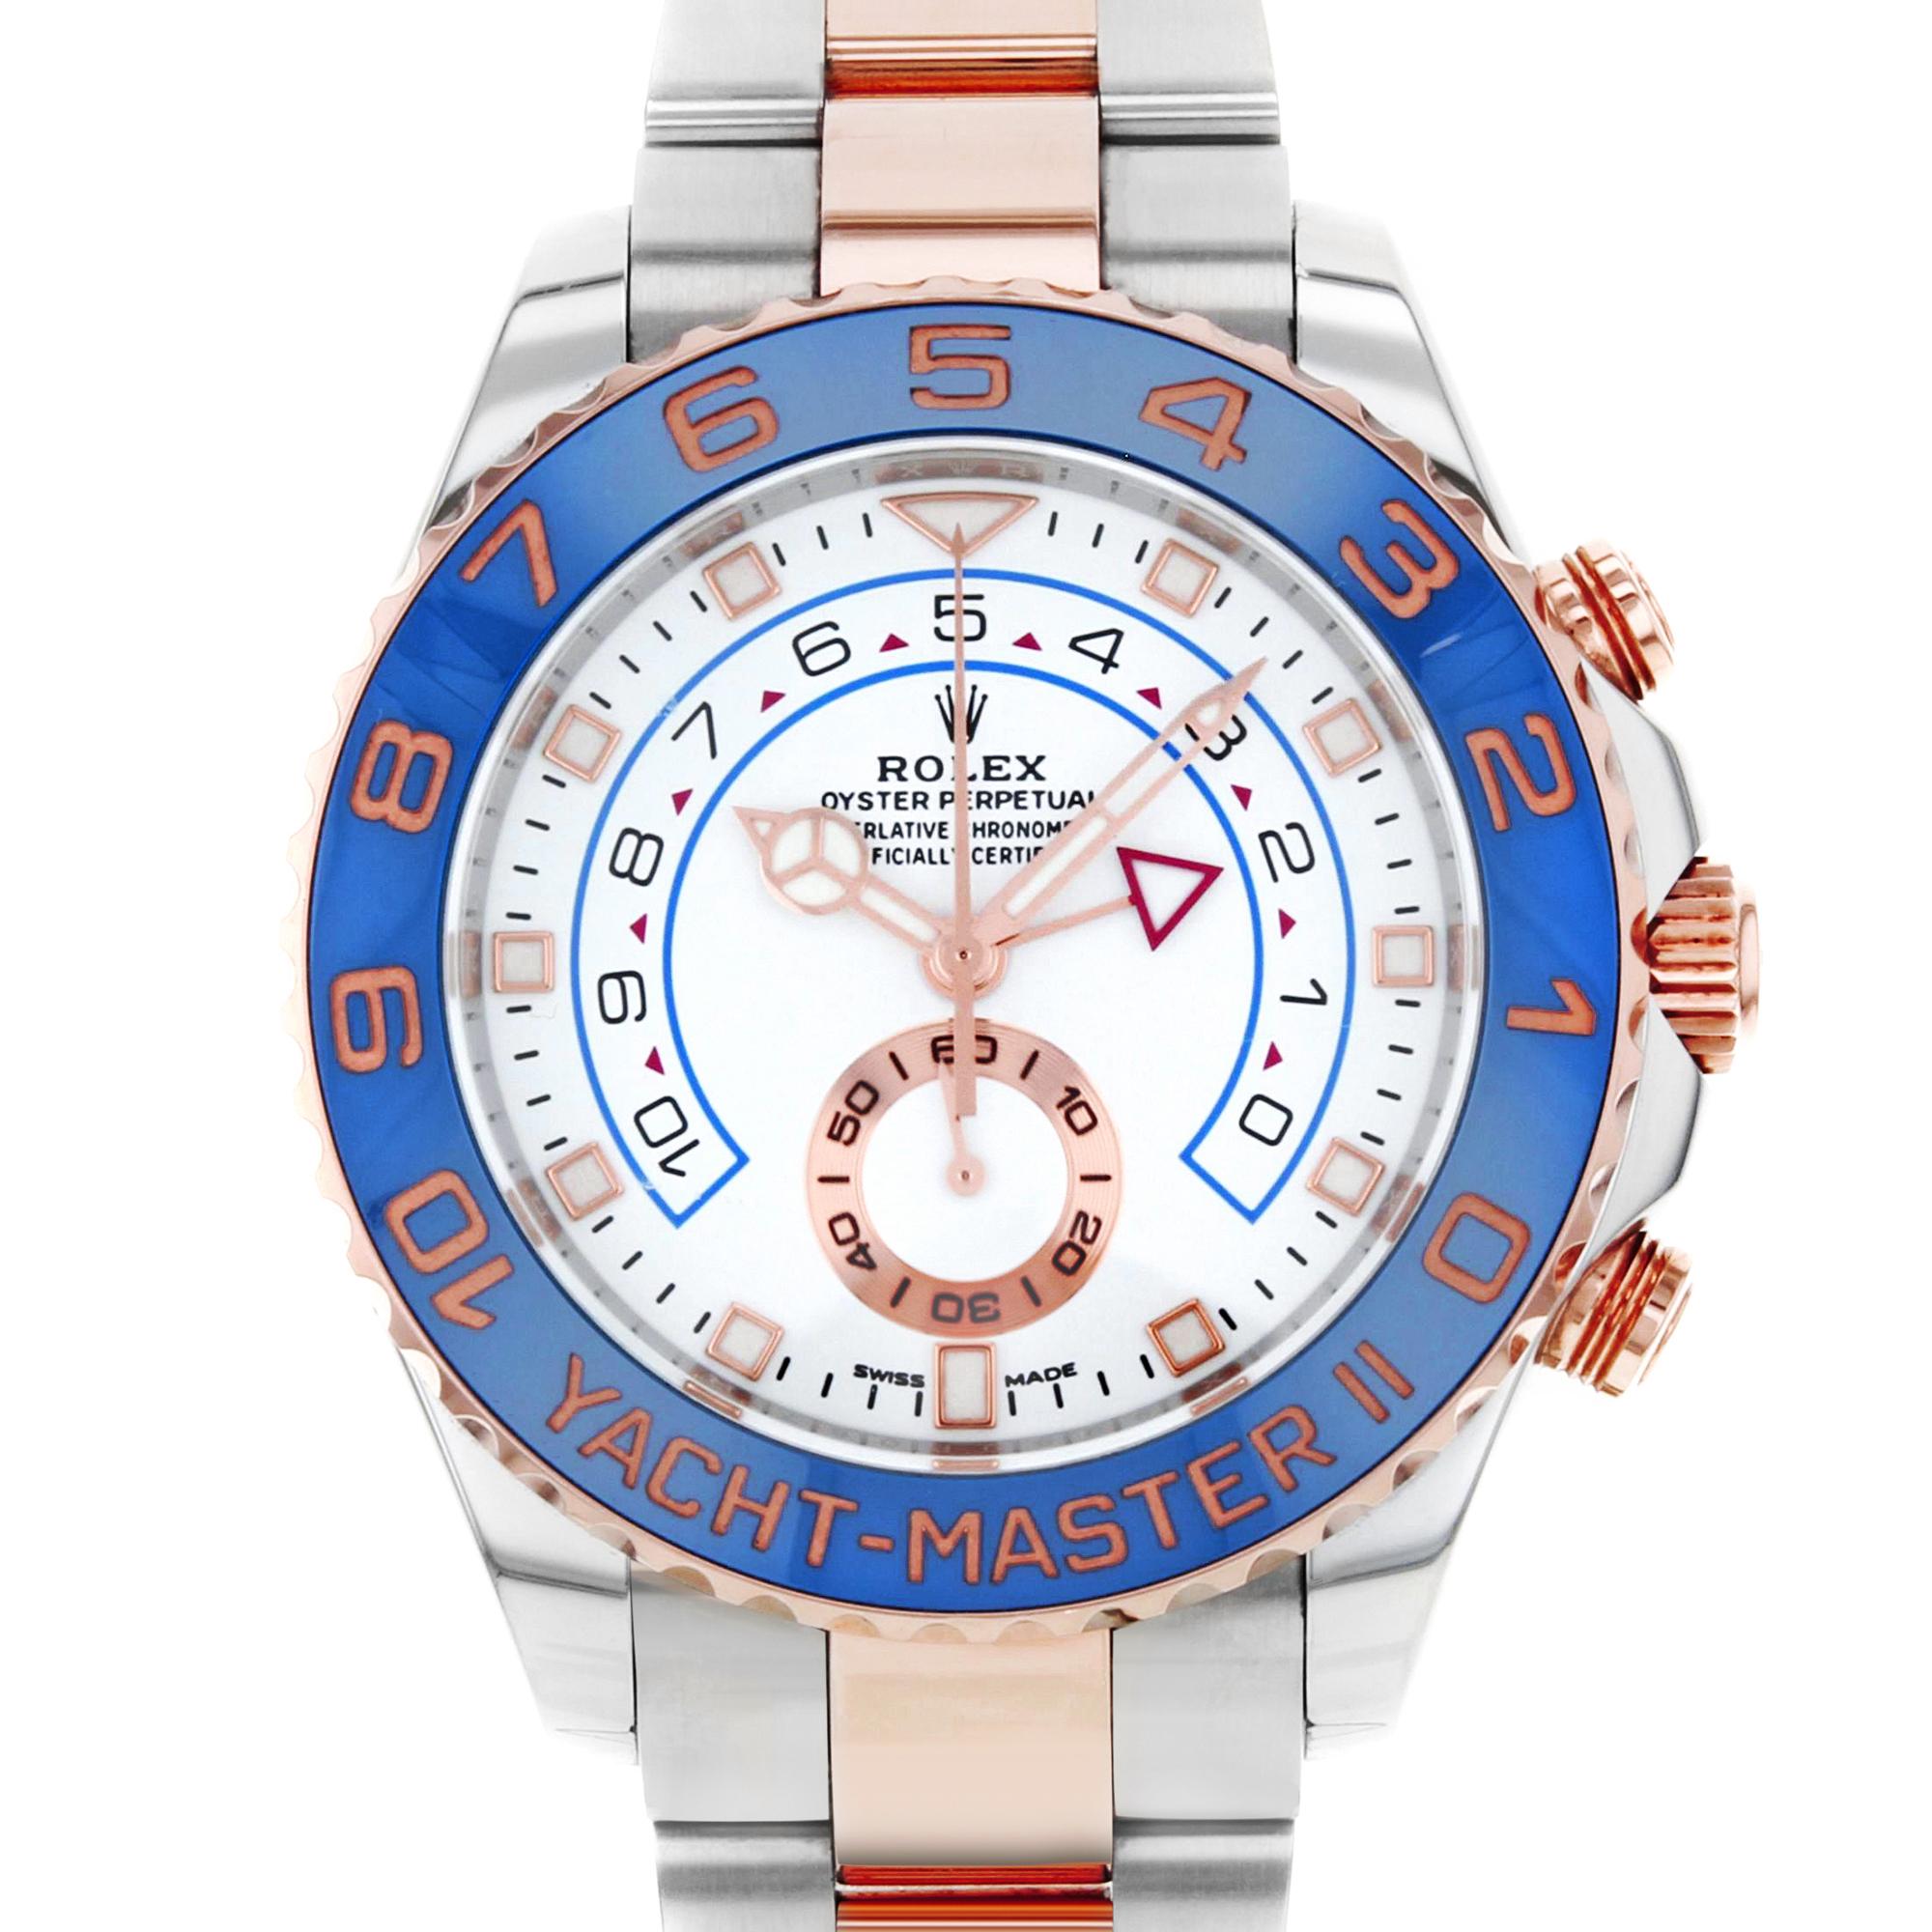 This pre-owned Rolex Yacht-Master II 116681 is a beautiful men's timepiece that is powered by an automatic movement which is cased in a stainless steel case. It has a round shape face, small seconds subdial dial, and has hand dots style markers. It